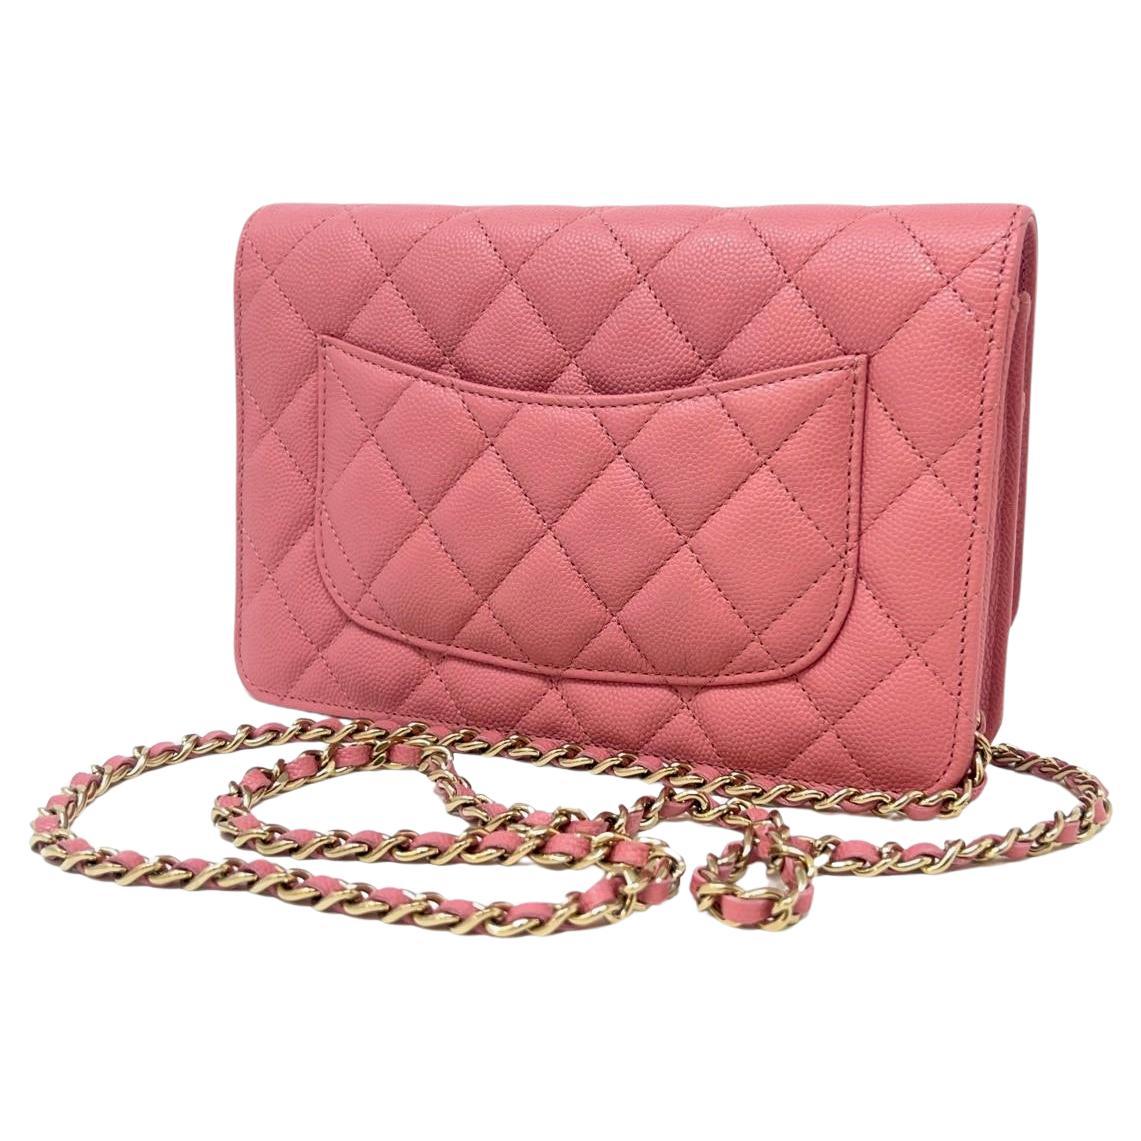 This Chanel quilted Wallet on Chain inPink is in caviar leather with Gold tone hardware, has tonal stitching, a front flap, a CC snap lock closure, a half moon back pocket, and Gold tone chain with a rose Pink leather interwoven shoulder/crossbody